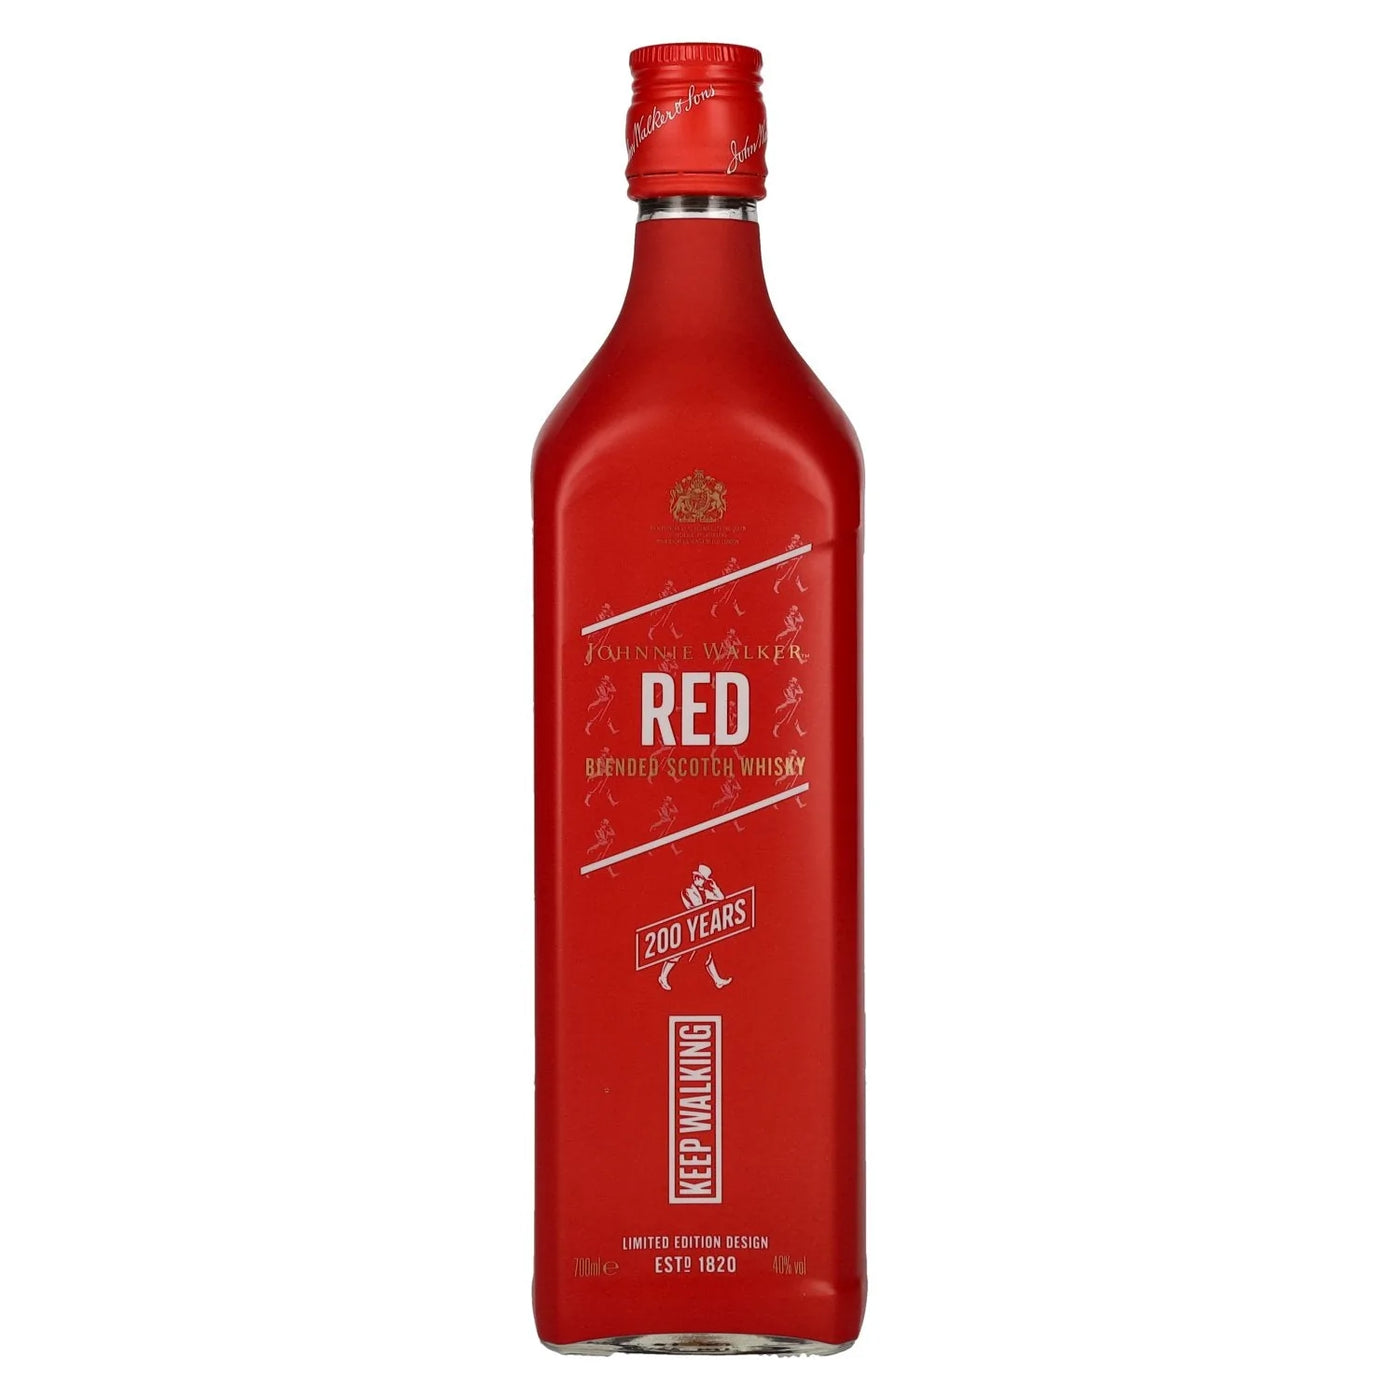 BUY] Scotch Limited Design 700ML Walking, | Keep Red, Whisky Johnnie at Walker Edition